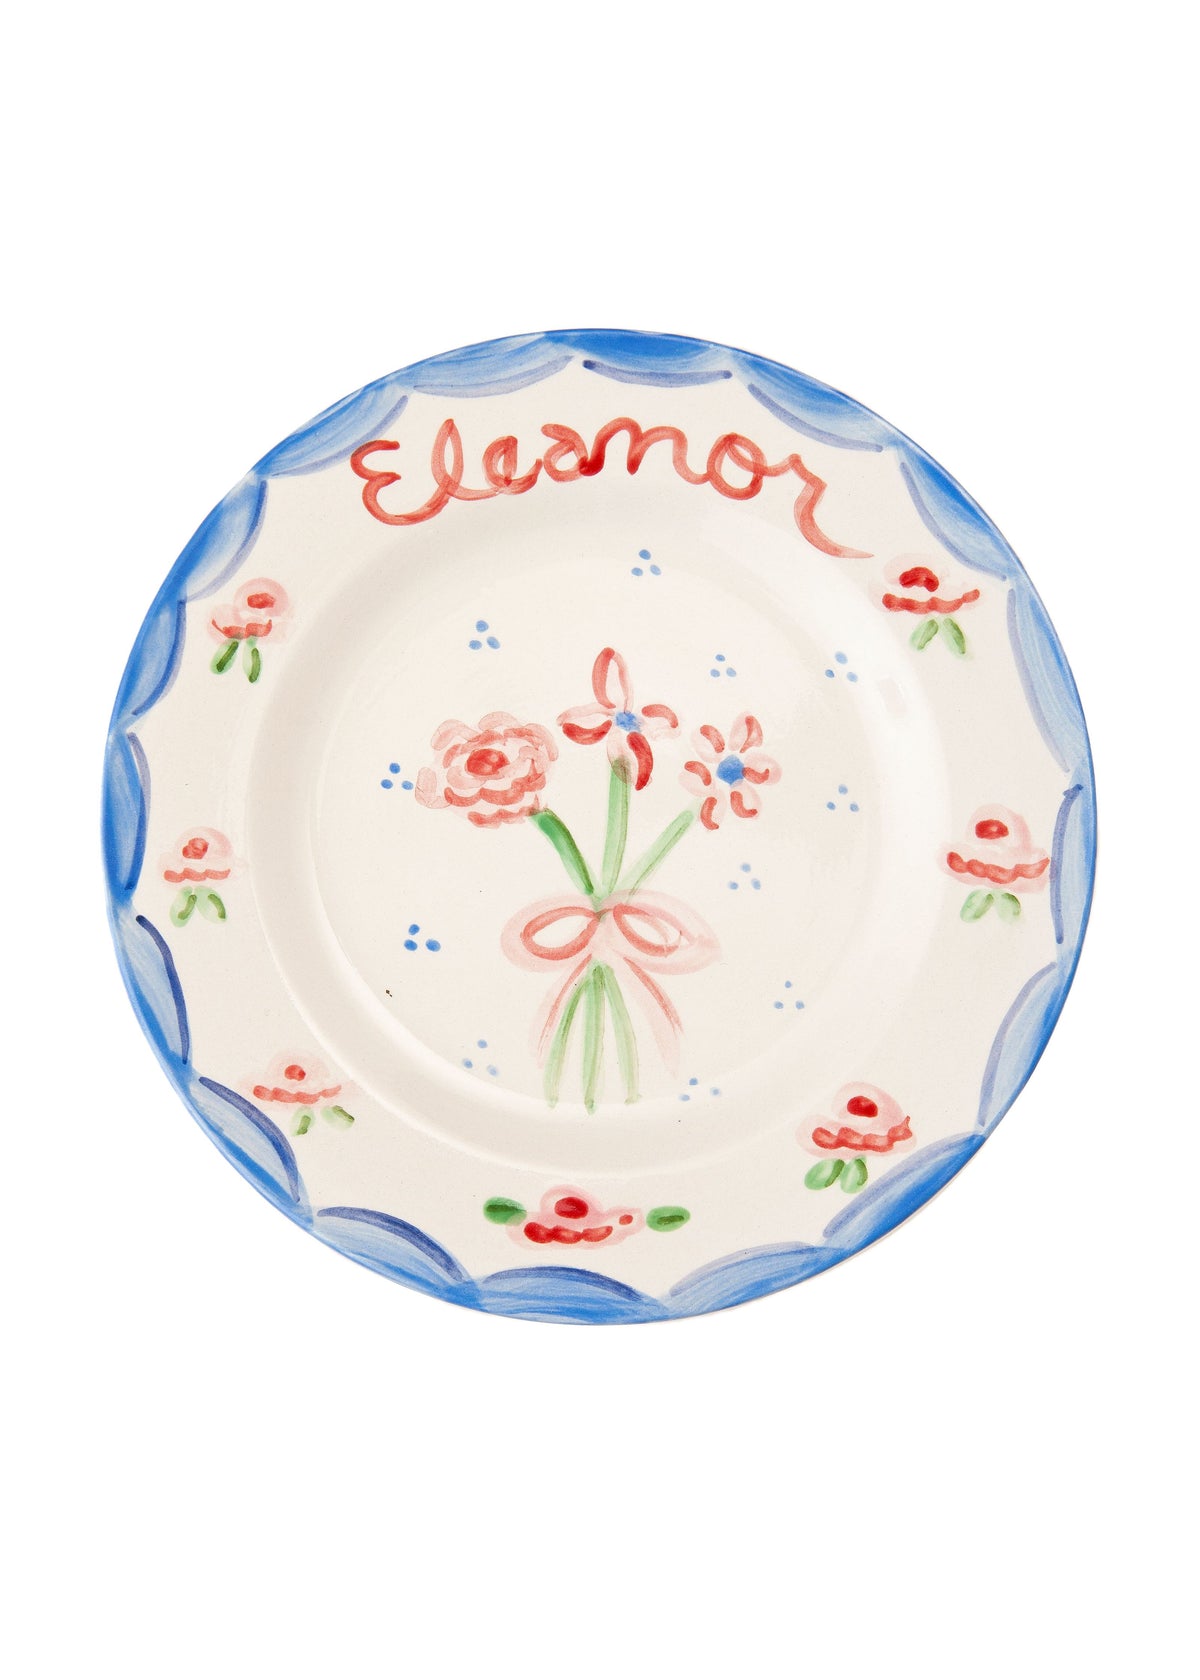 Pink and Red Floral Plate, 7.5"